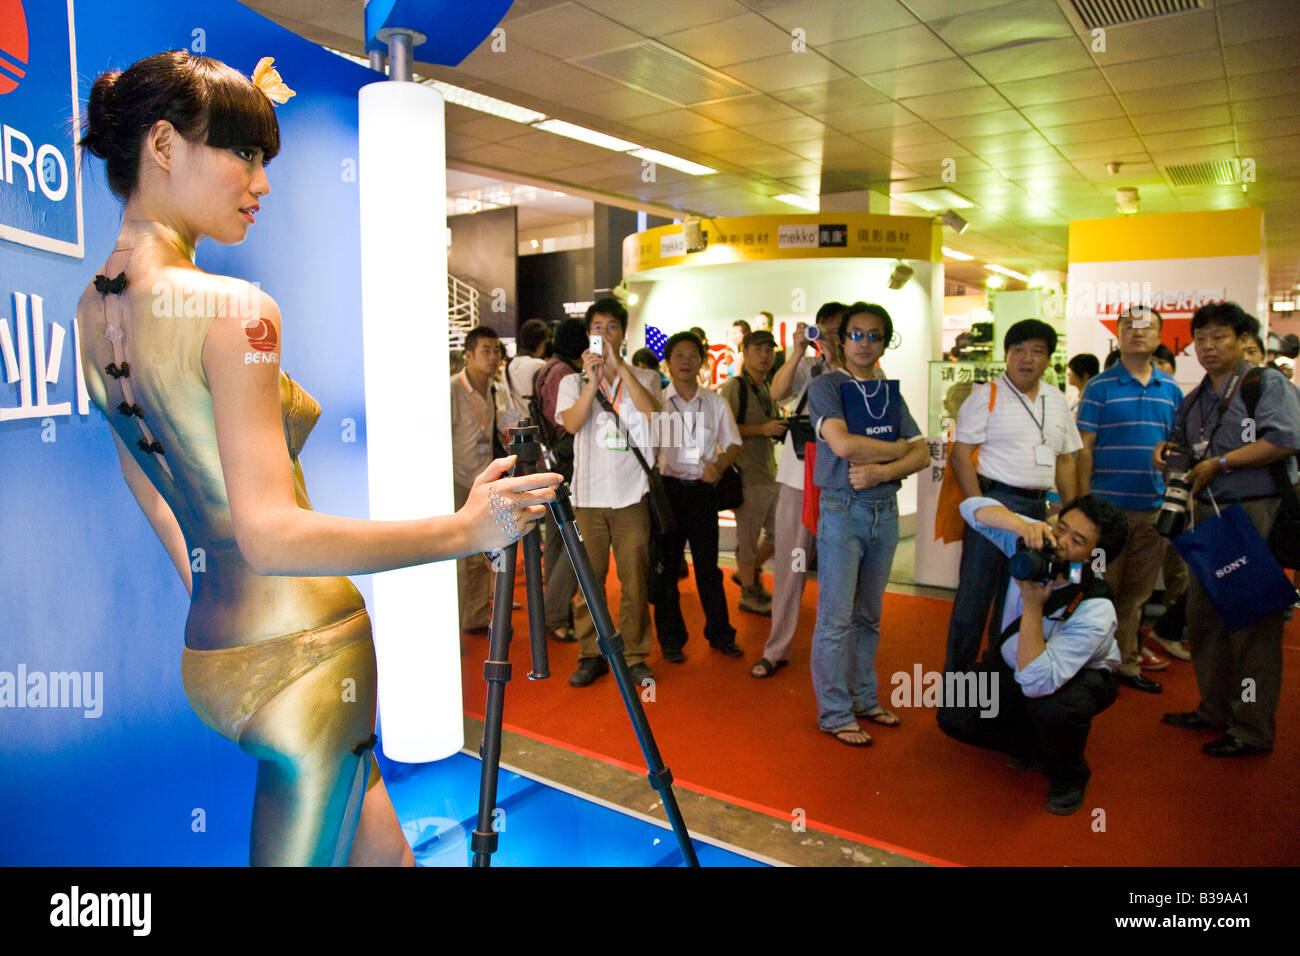 Chinese girl in bikini and gold paint on Benro tripod exhibition stand at photographic show in Beijing China July 2007 JMH3210 Stock Photo